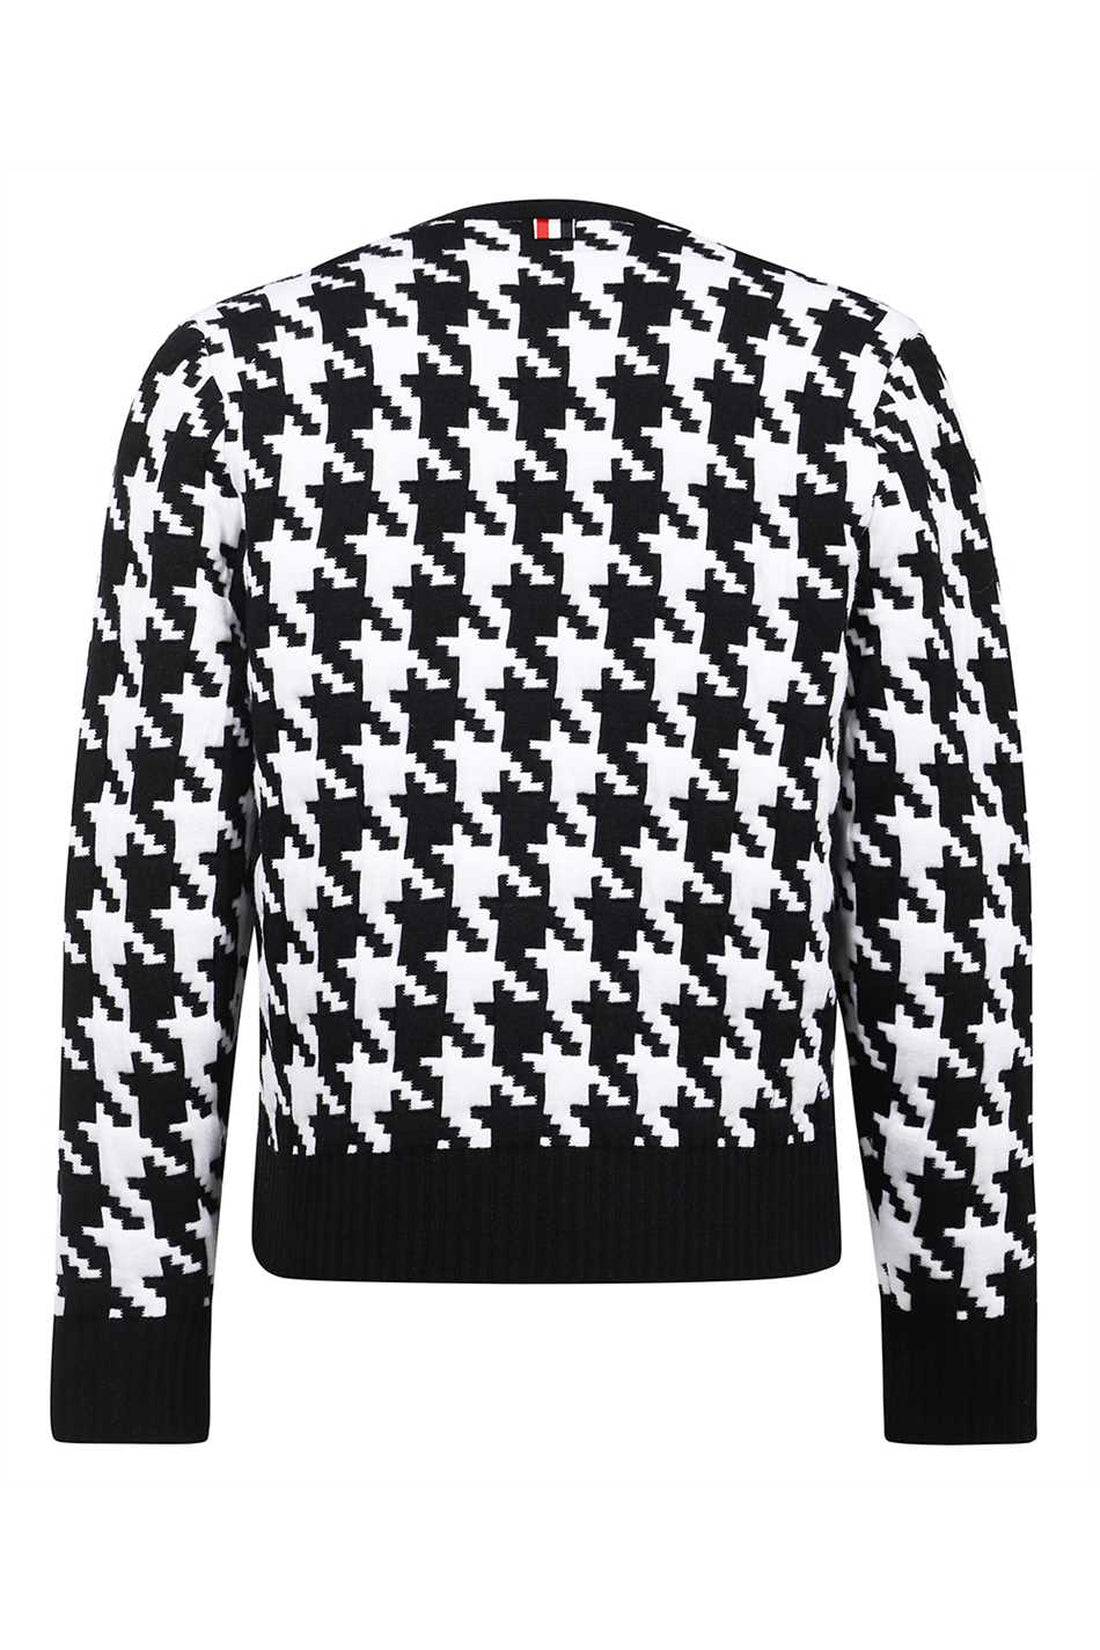 Thom Browne-OUTLET-SALE-Crew-neck wool sweater-ARCHIVIST